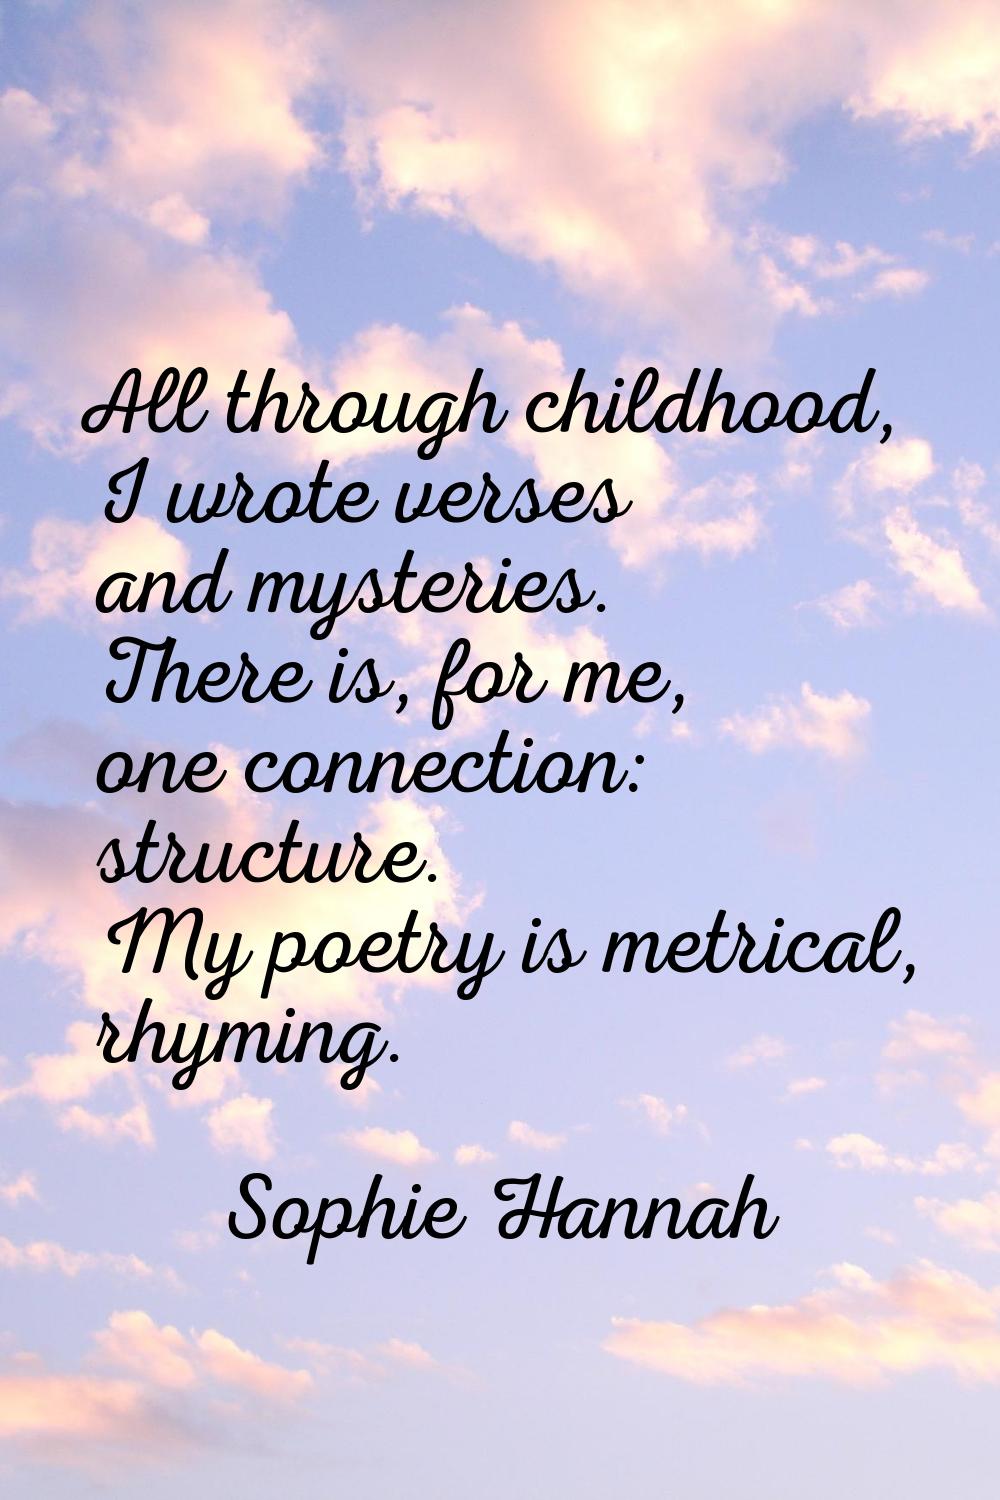 All through childhood, I wrote verses and mysteries. There is, for me, one connection: structure. M